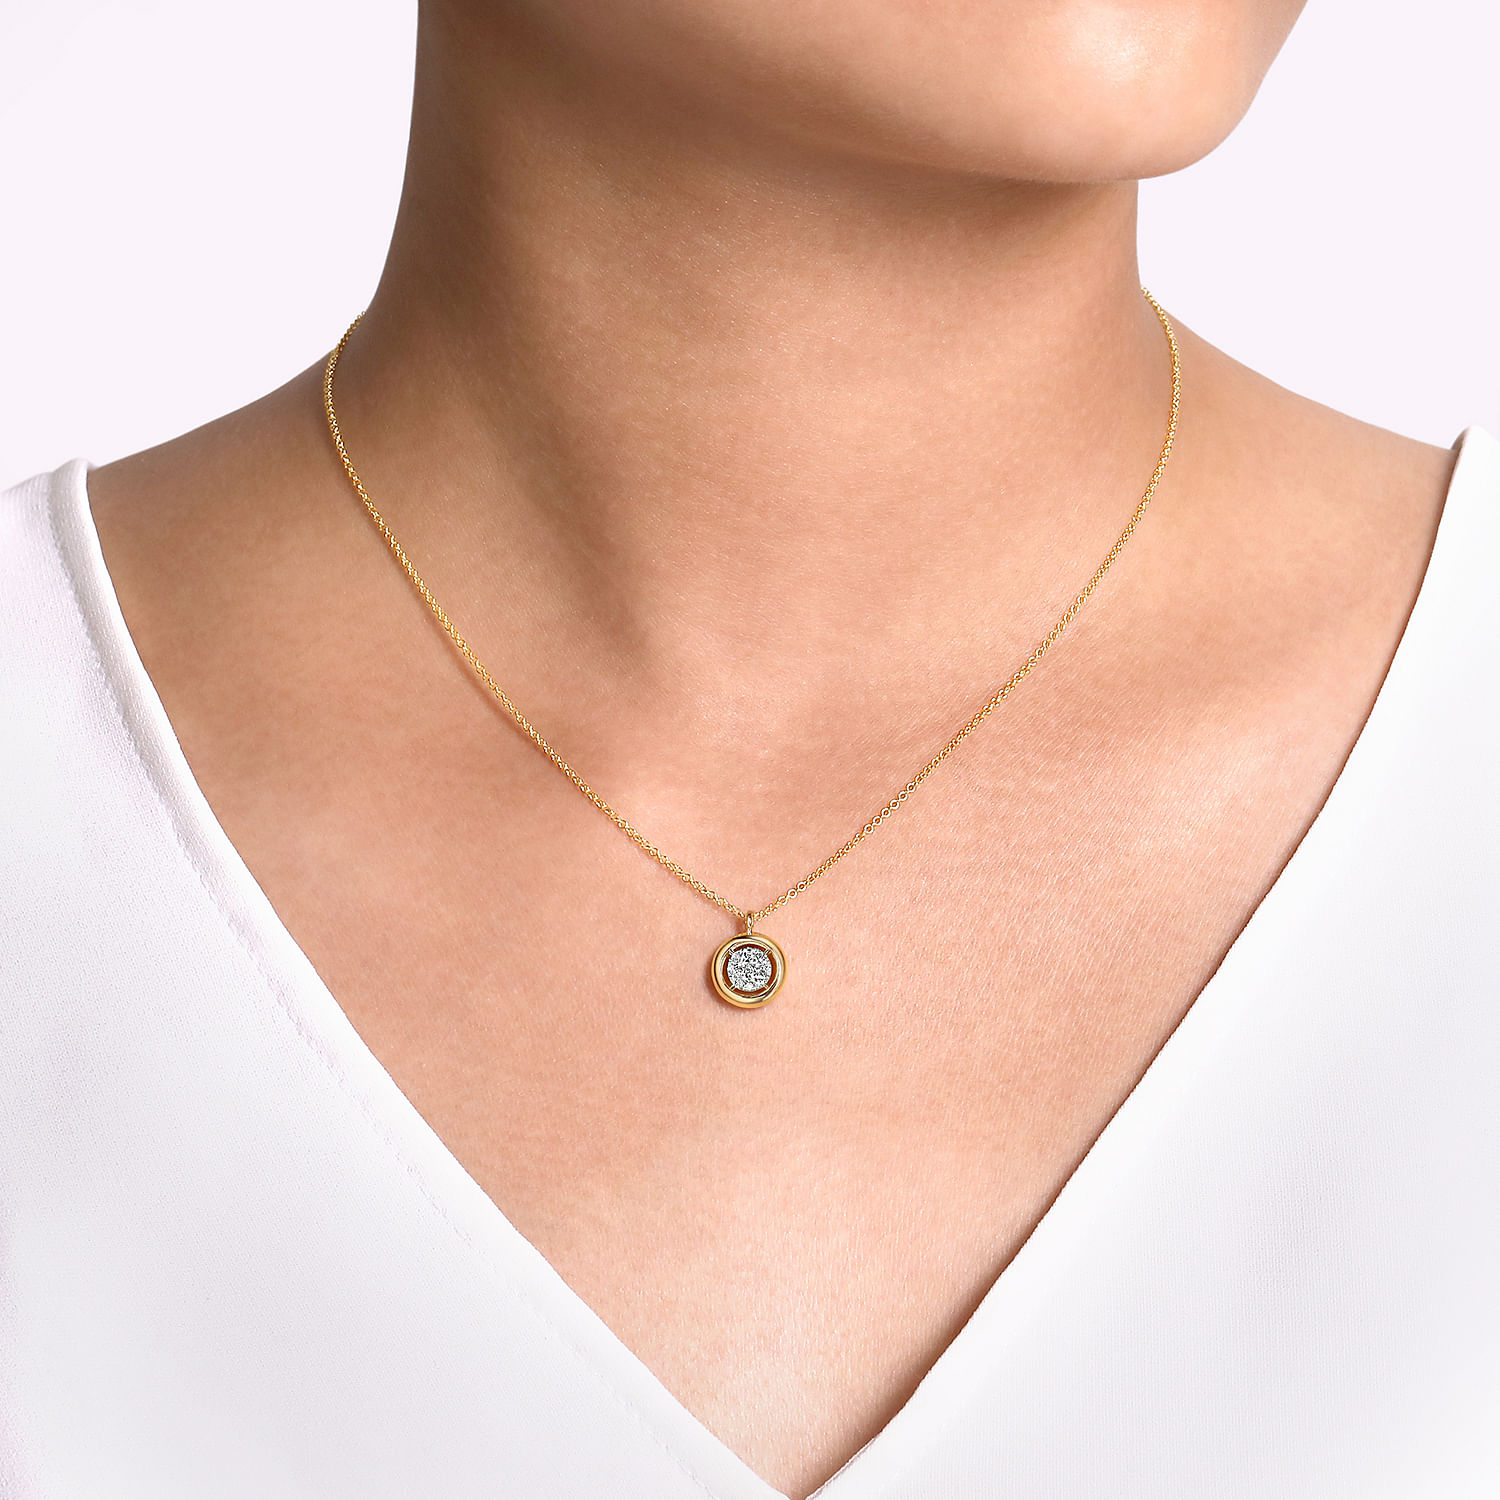 14K Yellow Gold Round Pavé Diamond Floating Pendant Necklace with Wide Border